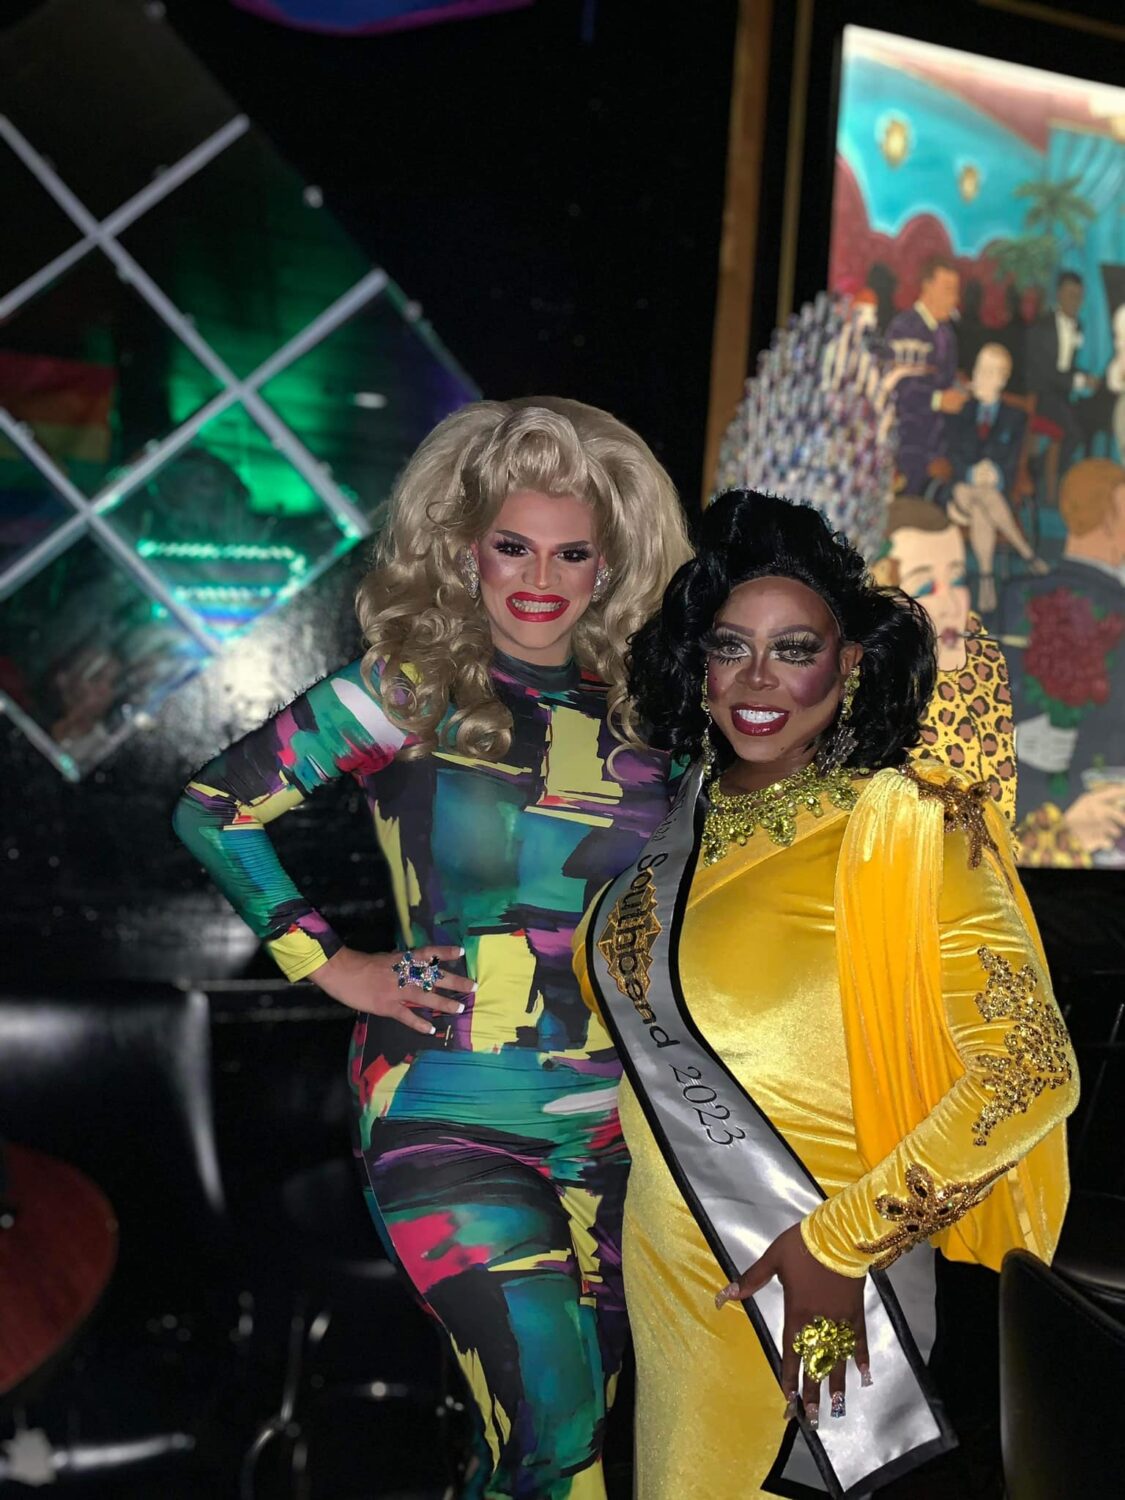 Ava Aurora Foxx and Mikayla Denise | Miss Southbend Pageant | Southbend Tavern (Columbus, Ohio) | 1/29/2023